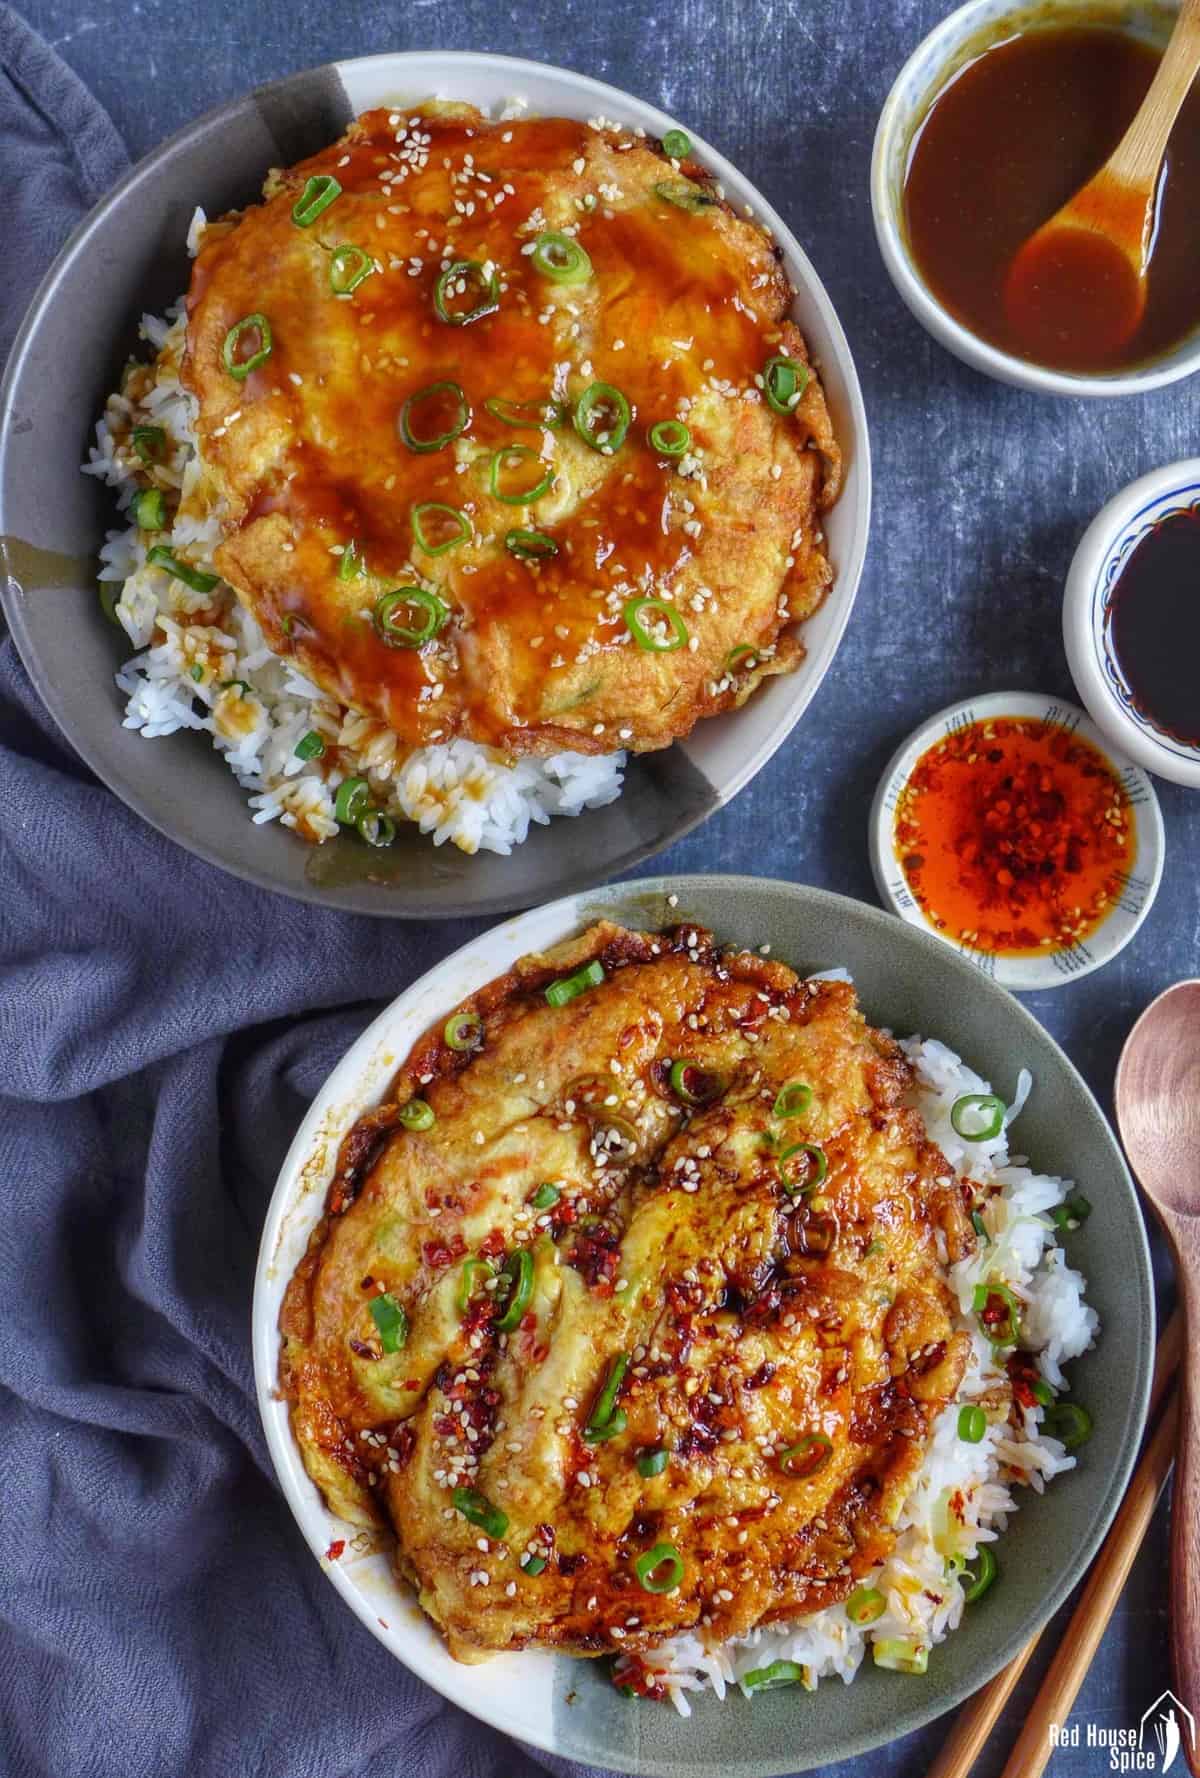 two pieces of egg foo young over rice. One with gravy, the other with chilli oil and soy sauce.